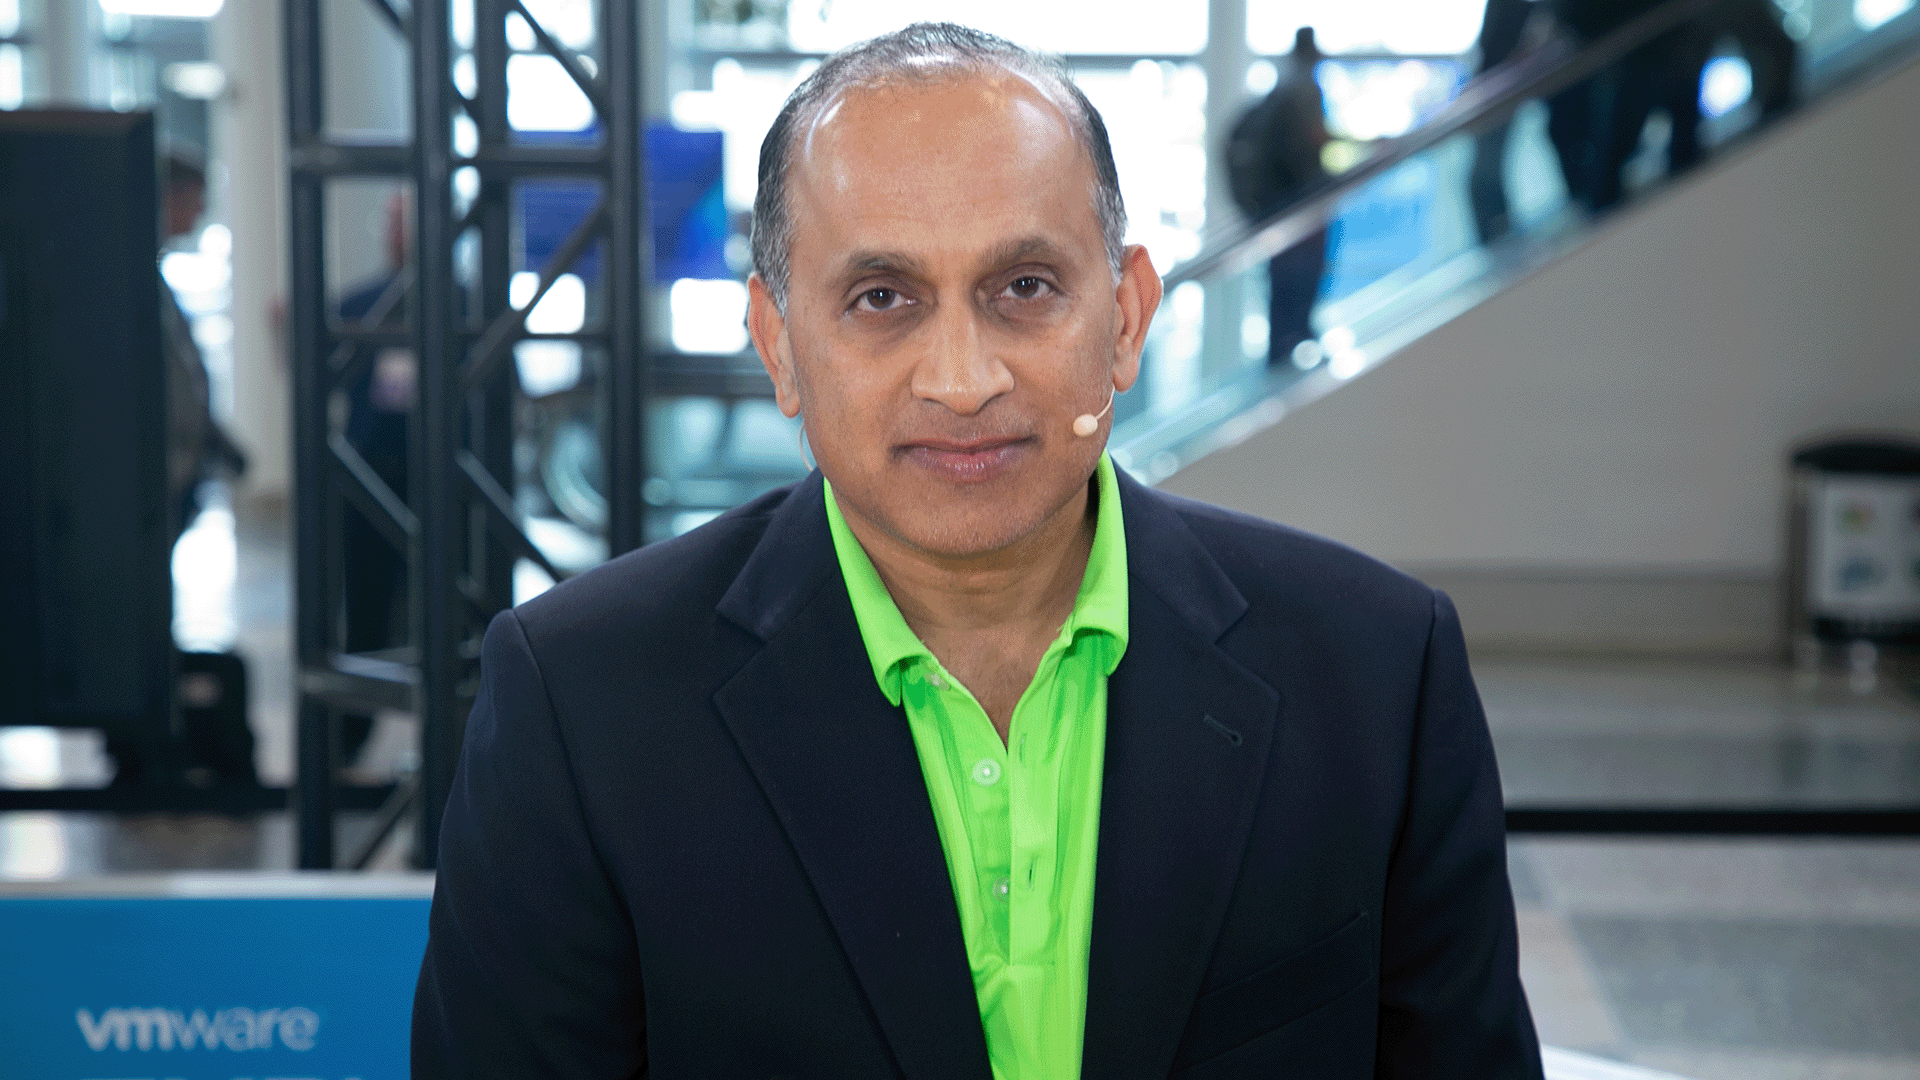 Could Cohesity mature into the new VMware or AWS? New CEO Sanjay Poonen weighs in